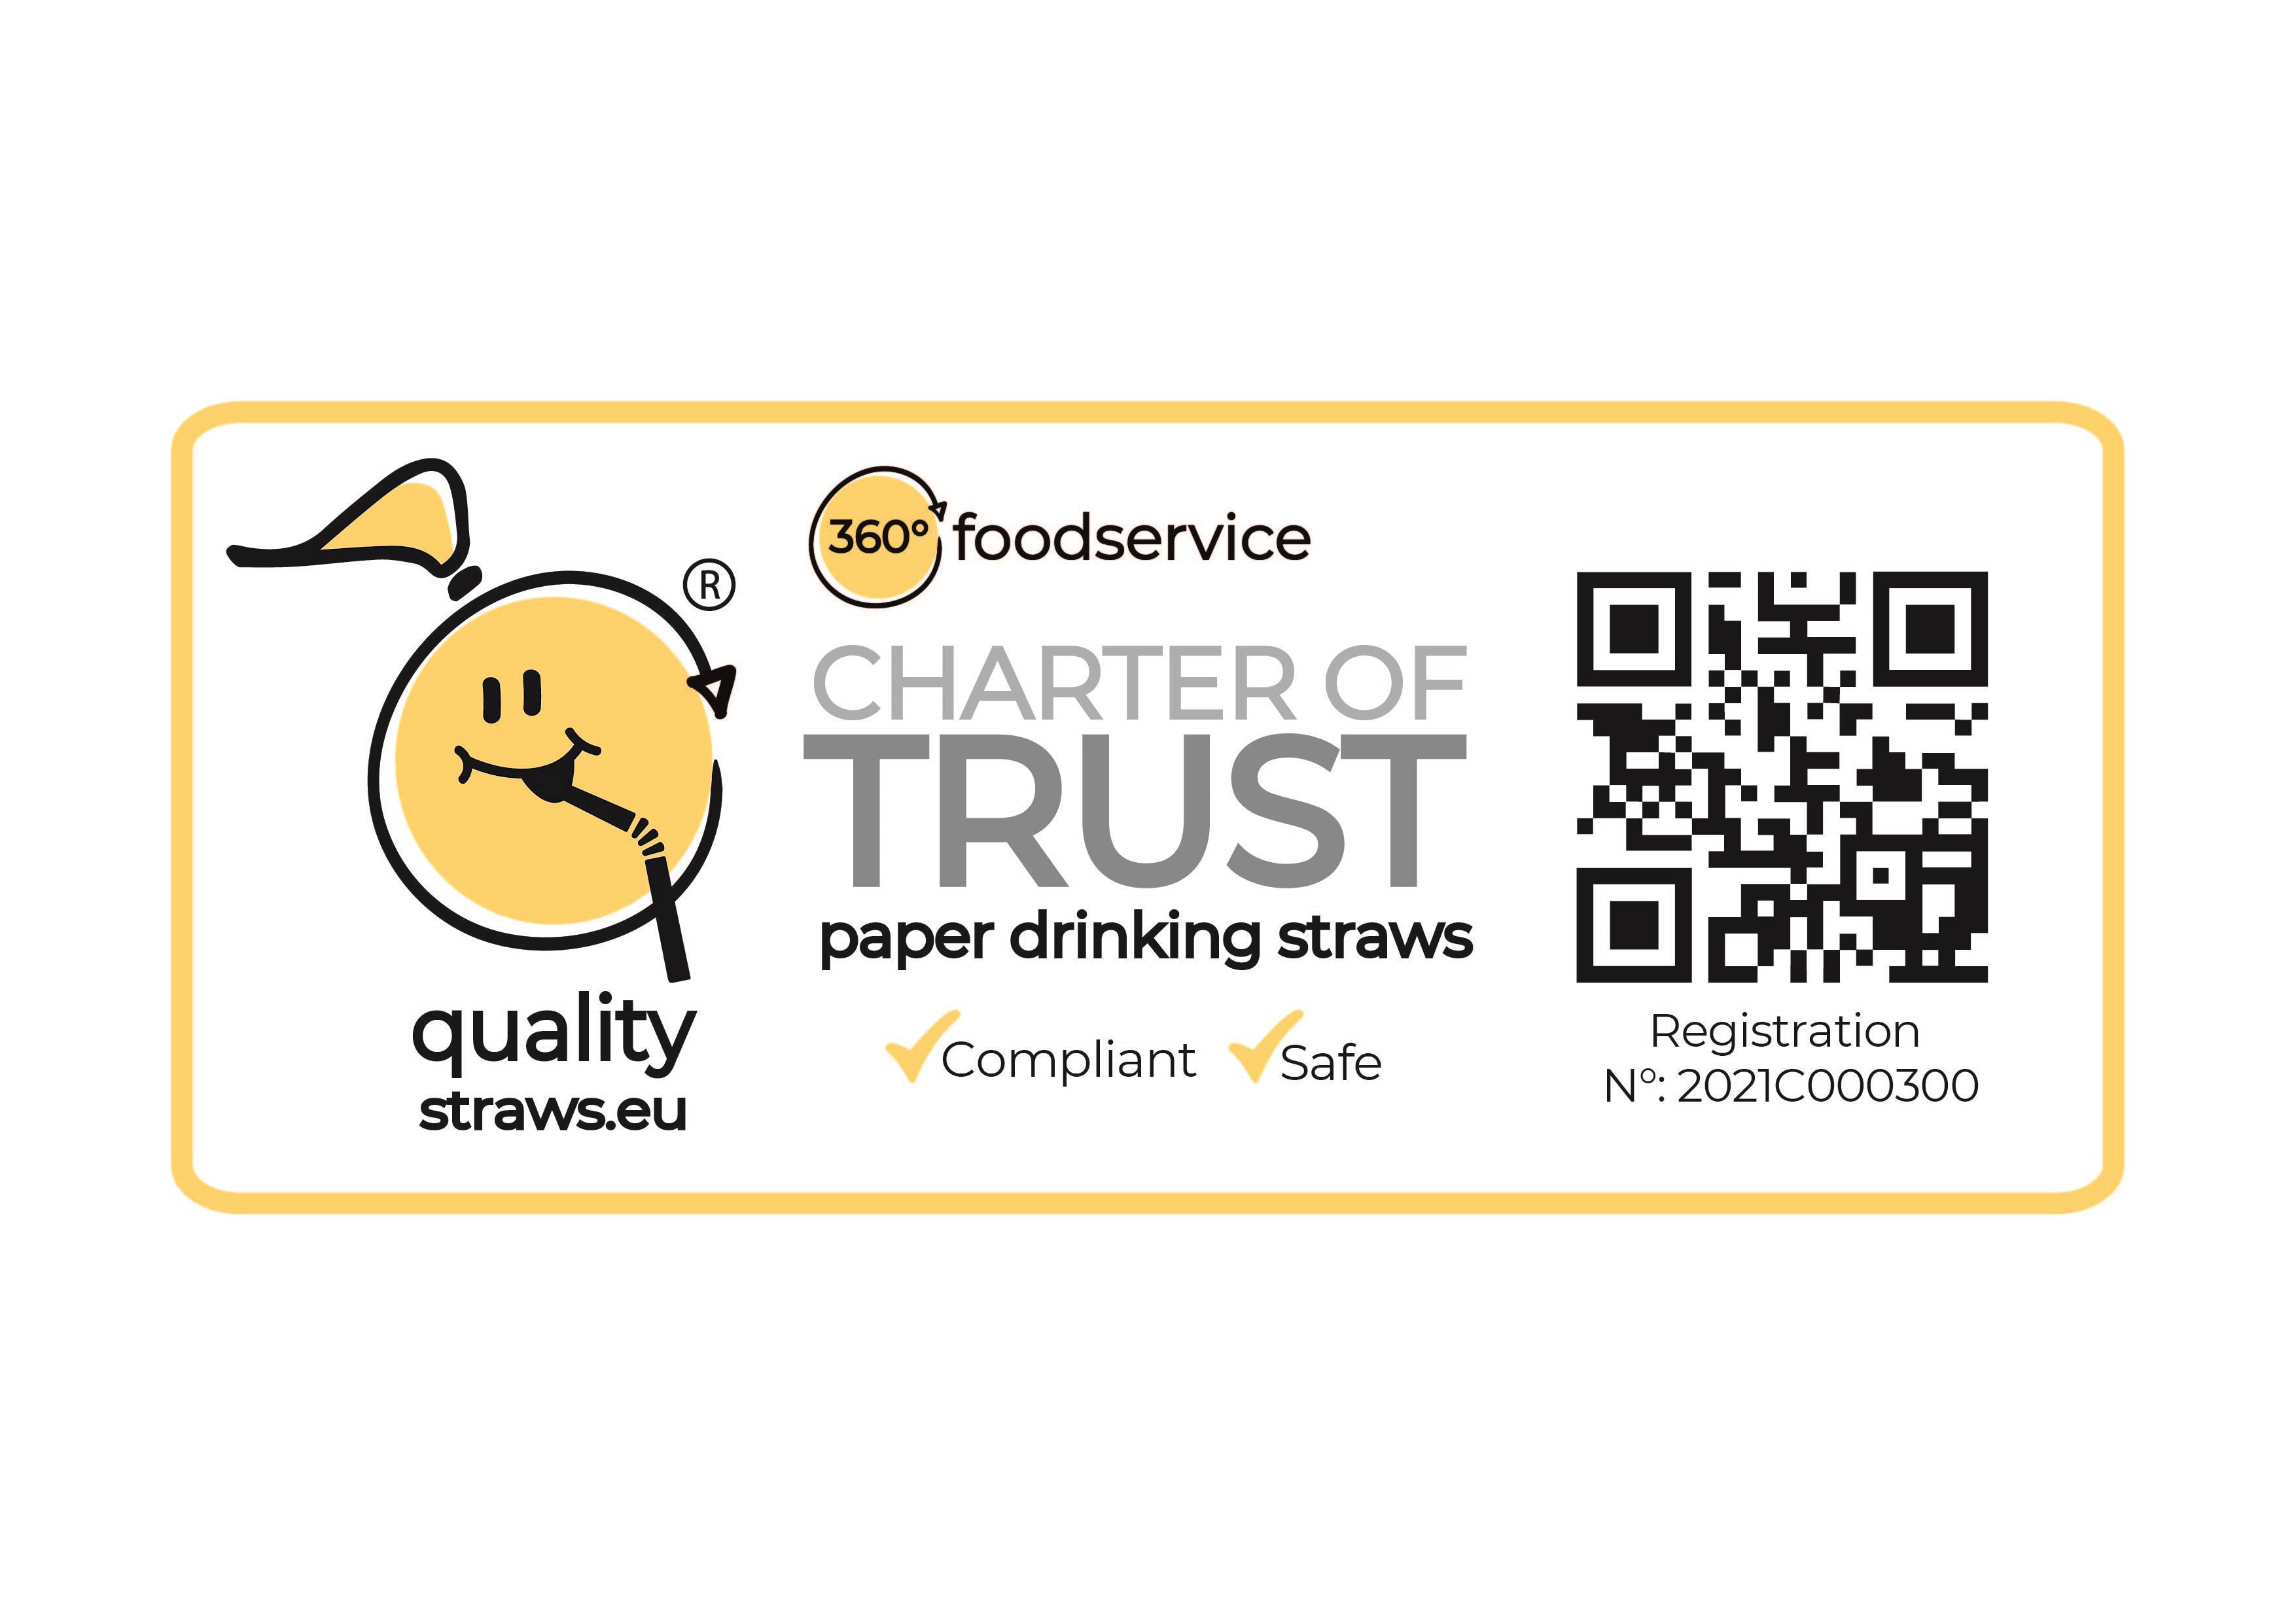 How to identify the safest high-quality paper straw?